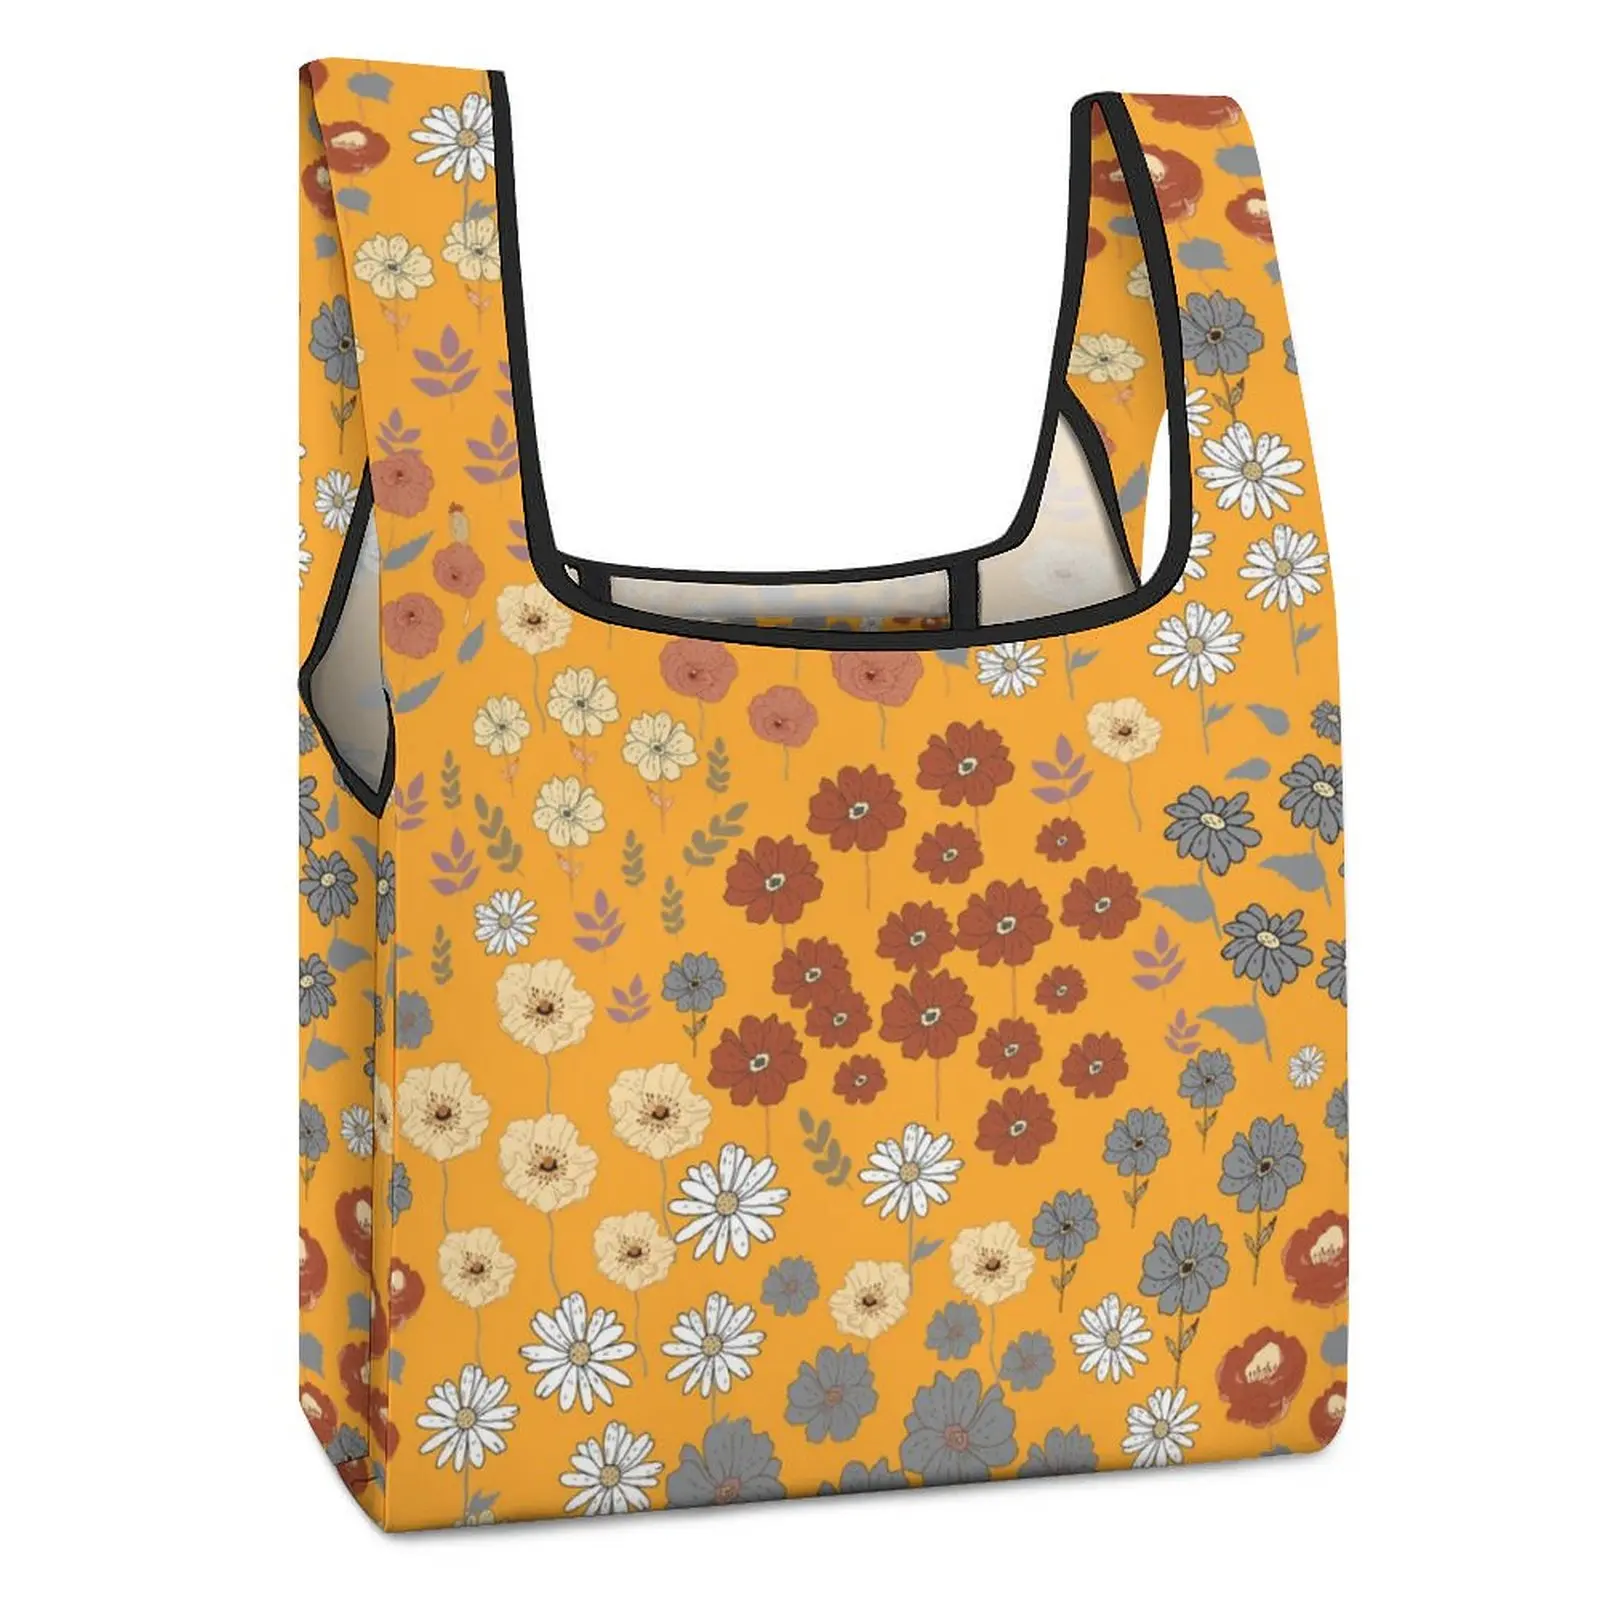 Customized Printed Collapsible Shopping Bag Double Strap Handbag Orange Print Tote Casual Woman Grocery Bag Custom Pattern